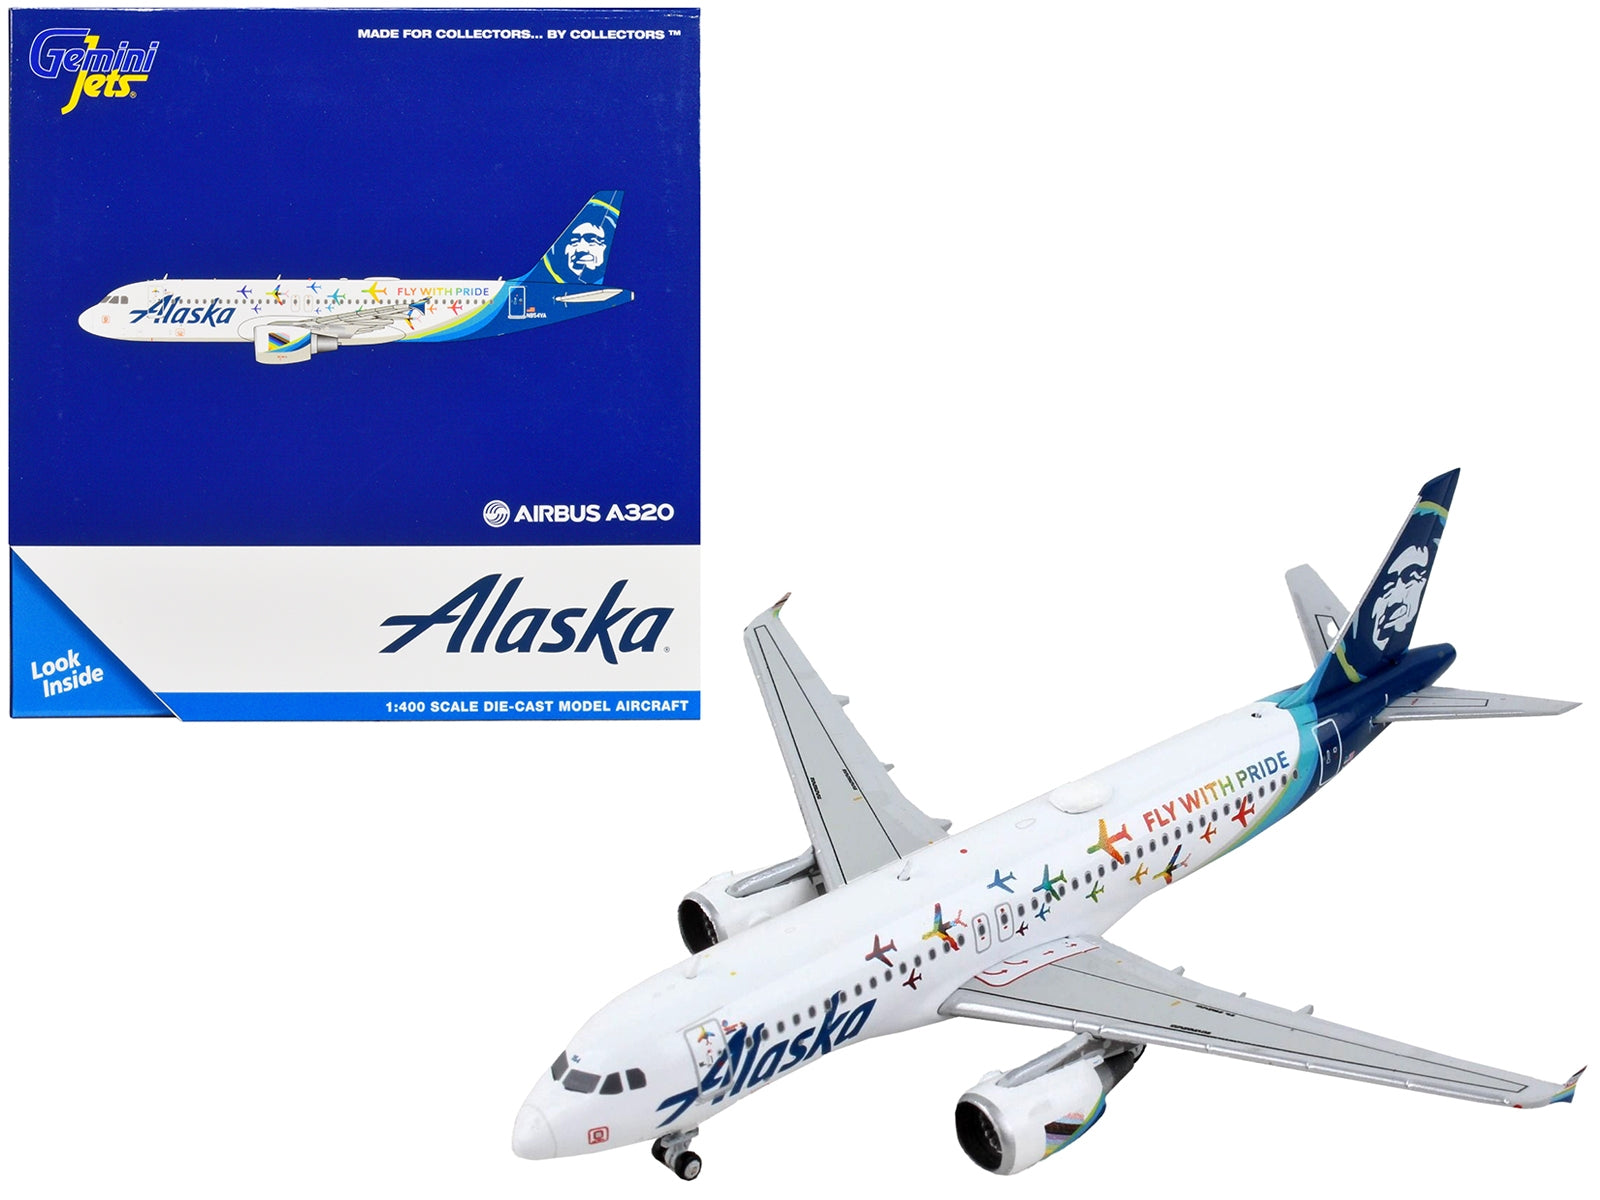 Airbus A320 Commercial Aircraft "Alaska Airlines - Fly with Pride" White with Blue Tail 1/400 Diecast Model Airplane by GeminiJets